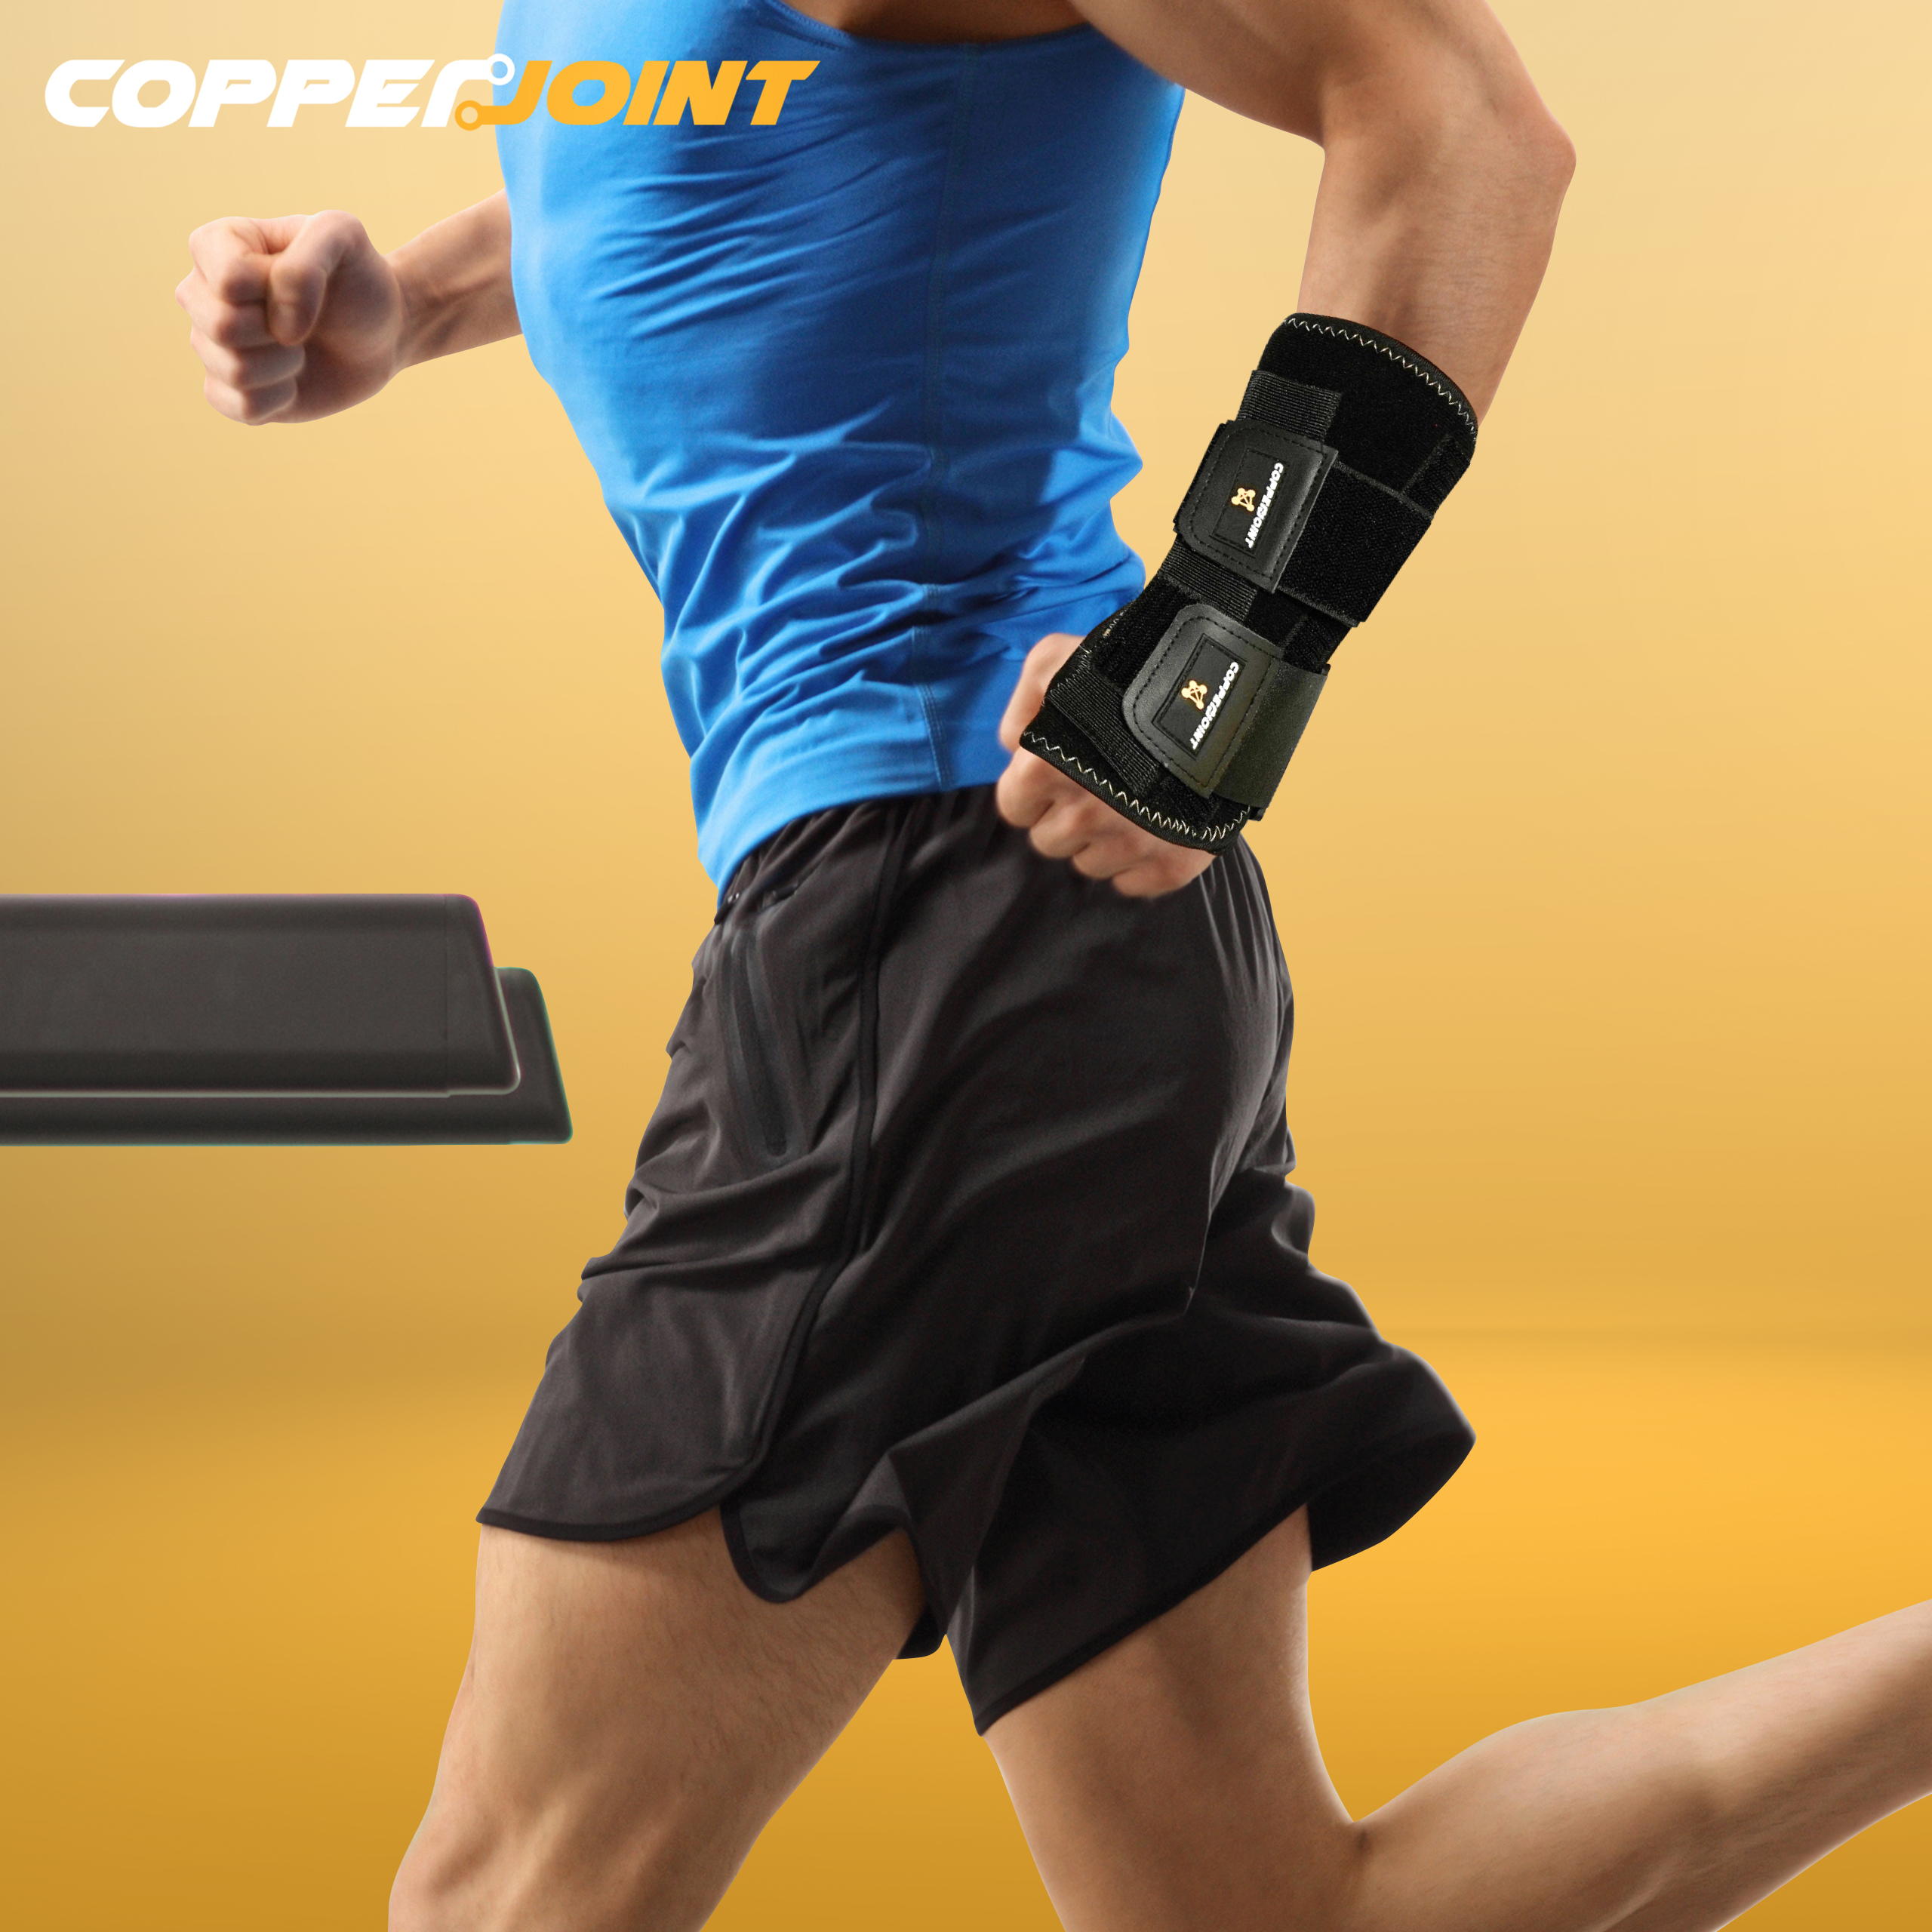 CopperJoint Offers Launch Discount On New Wrist Brace For Carpal Tunnel